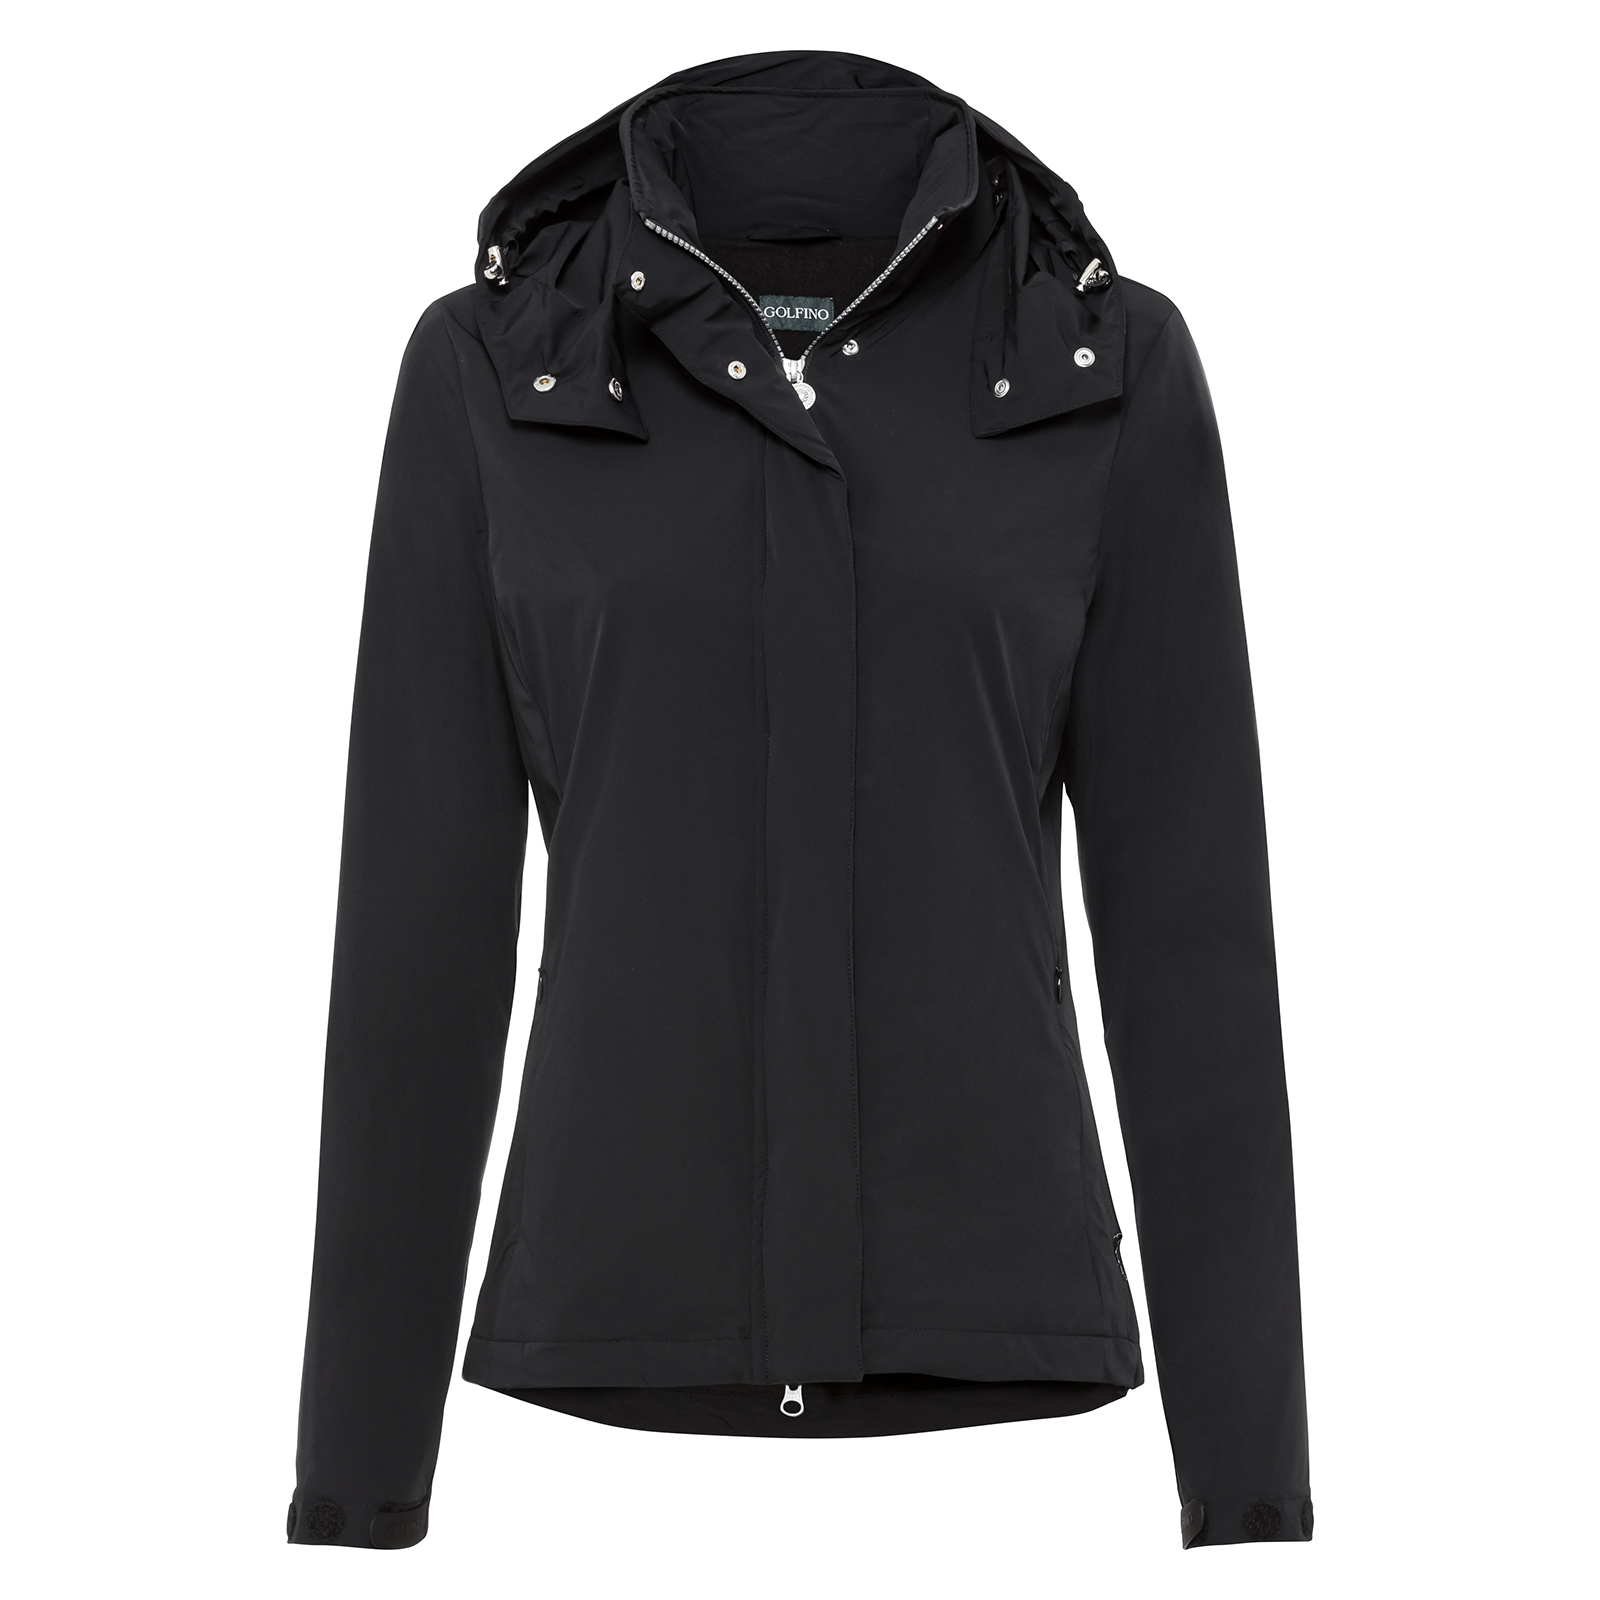 Ladies’ windproof golf jacket with cold weather protection and detachable hood